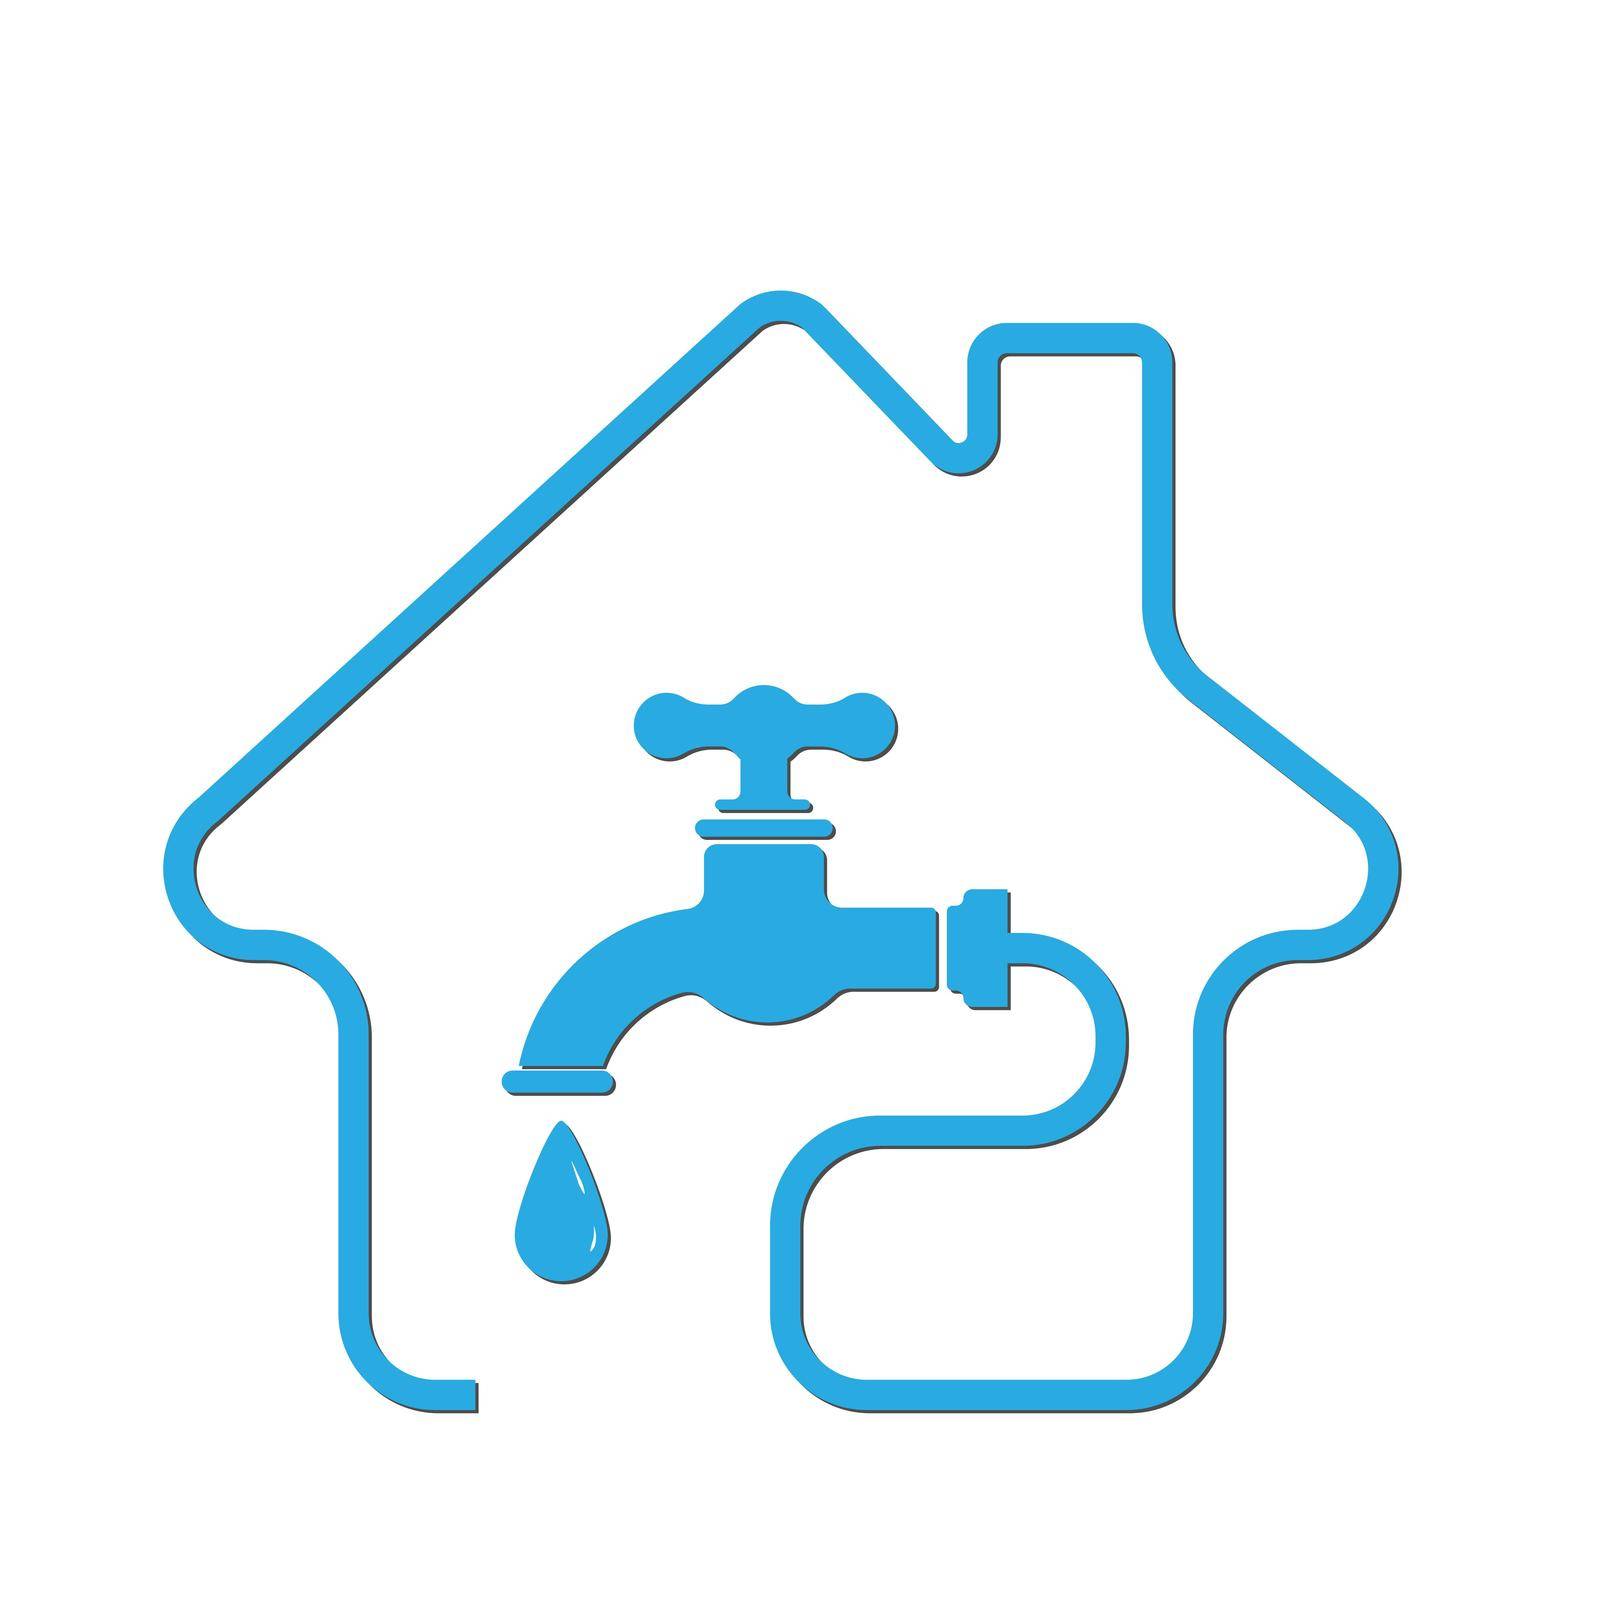 Water supply, utility icon. Vector stock illustration by Grommik